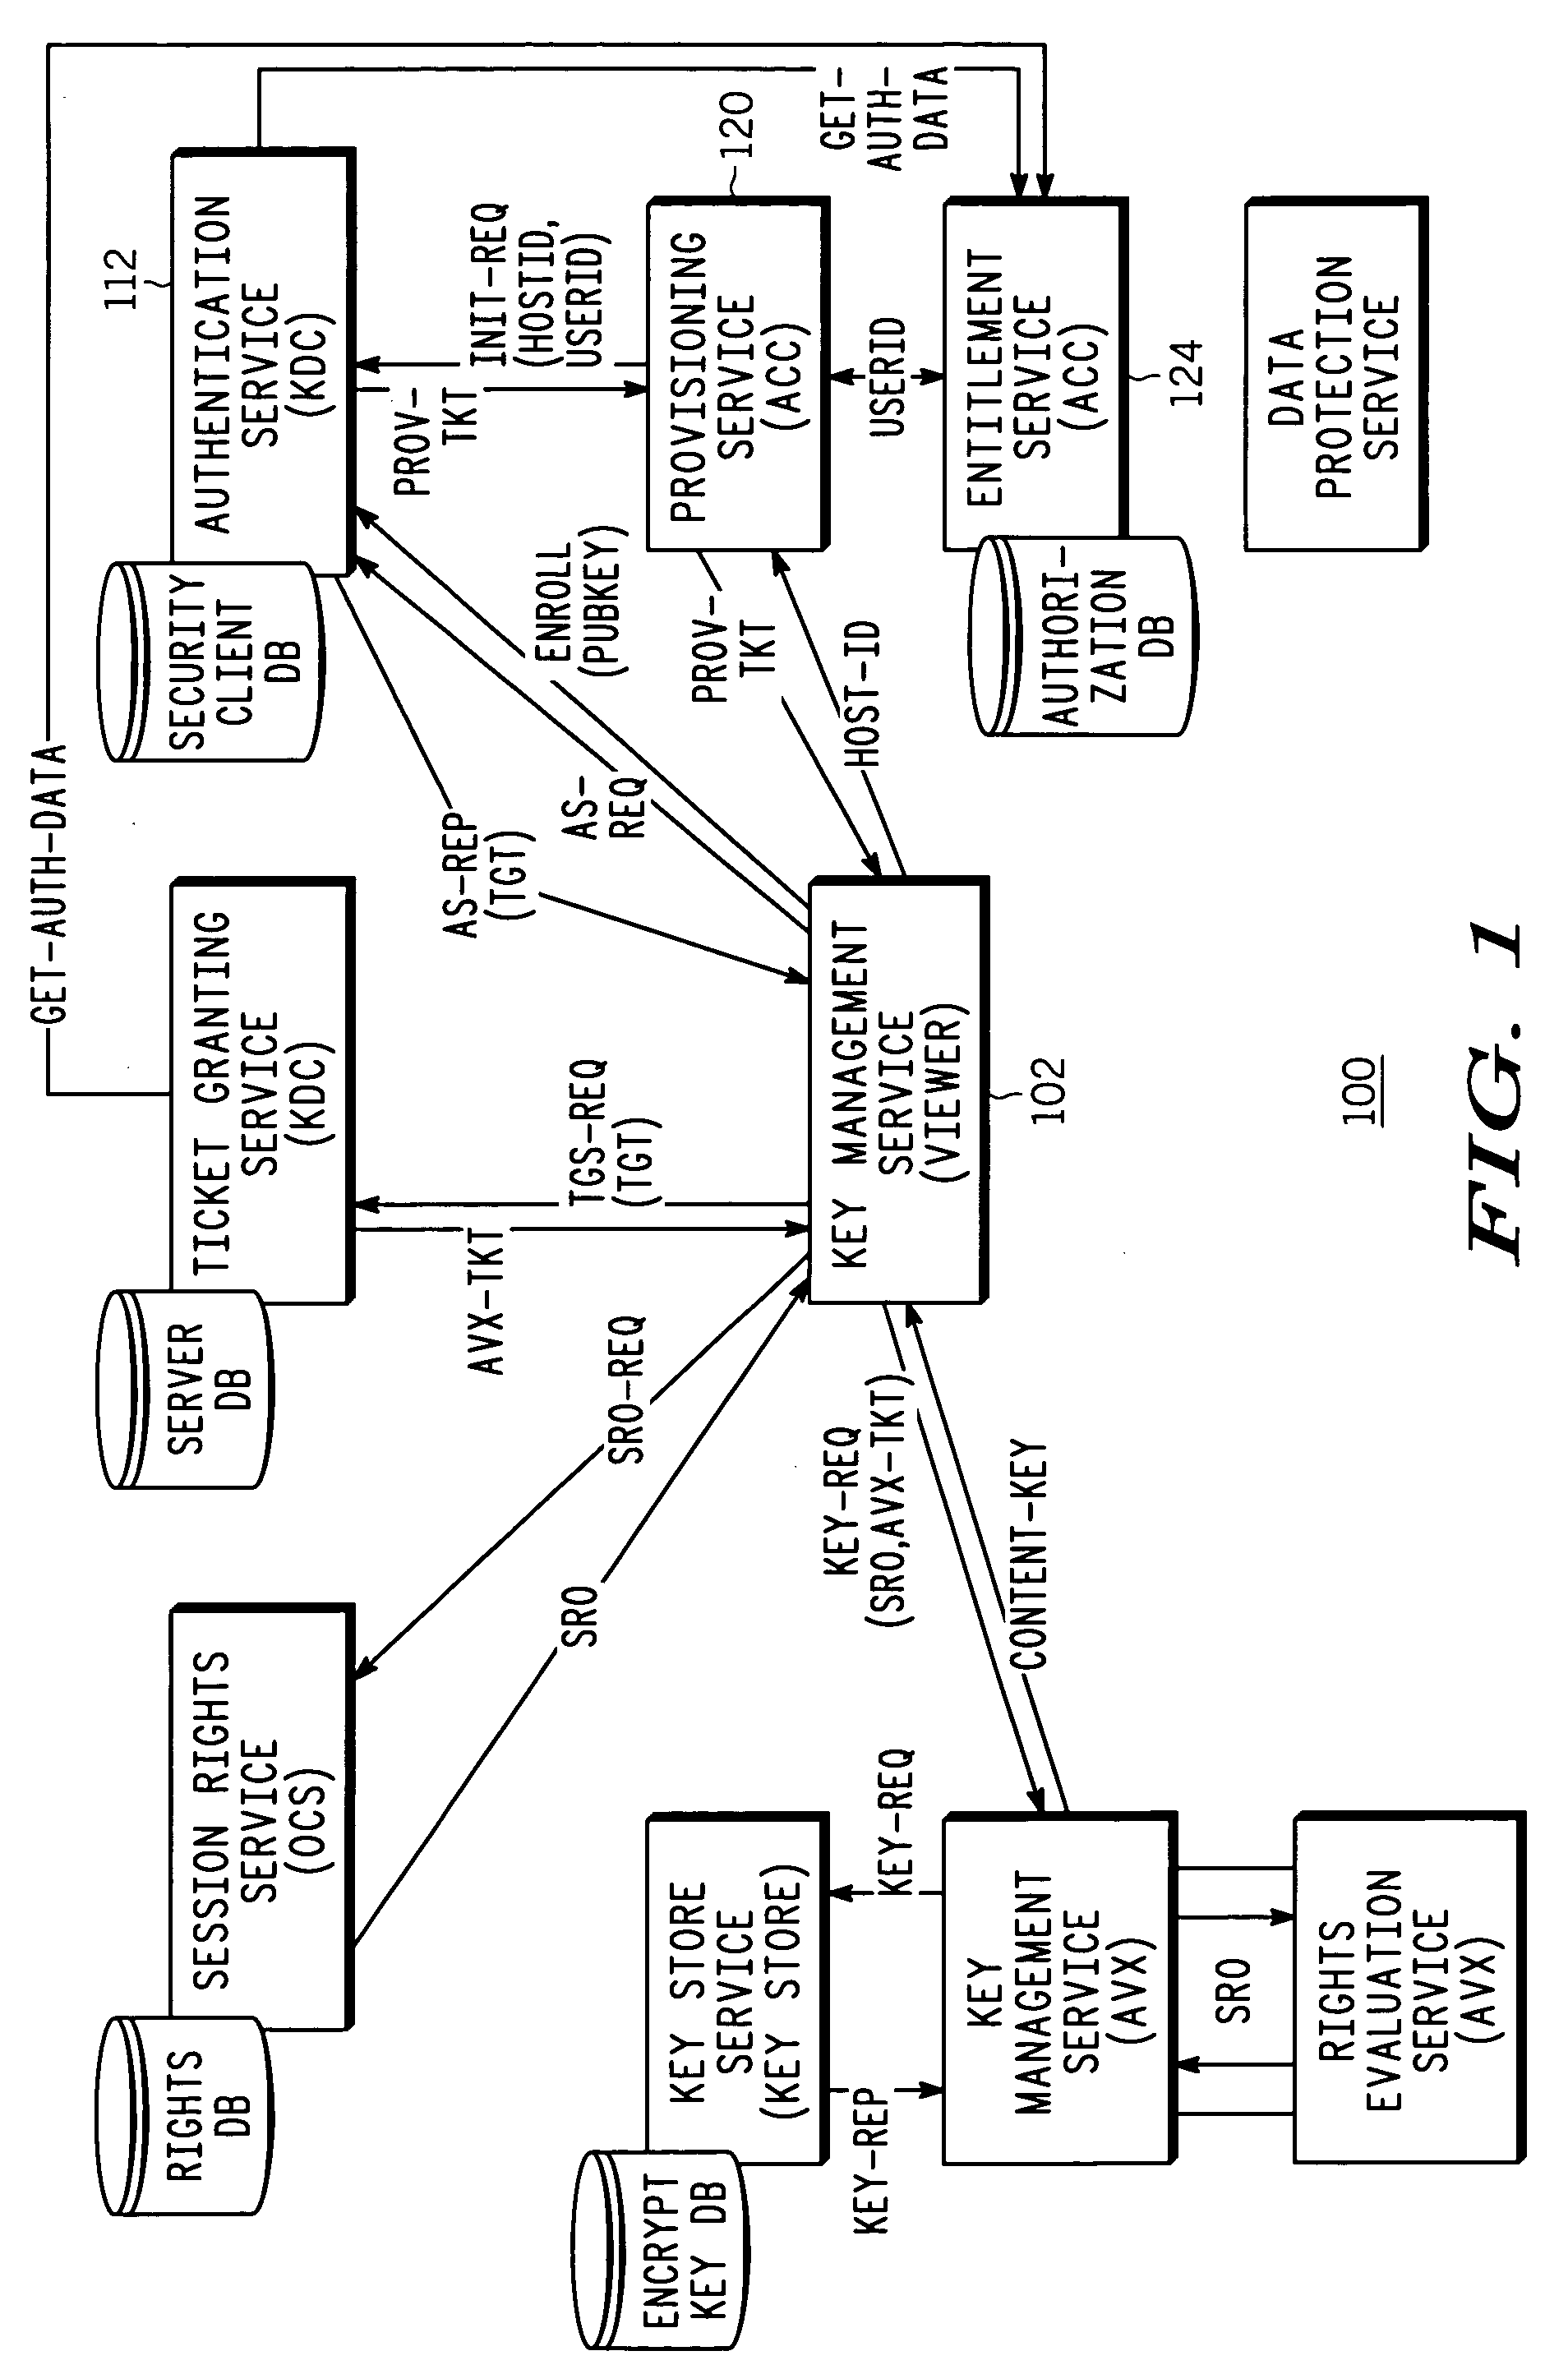 Ticket-based secure time delivery in digital networks